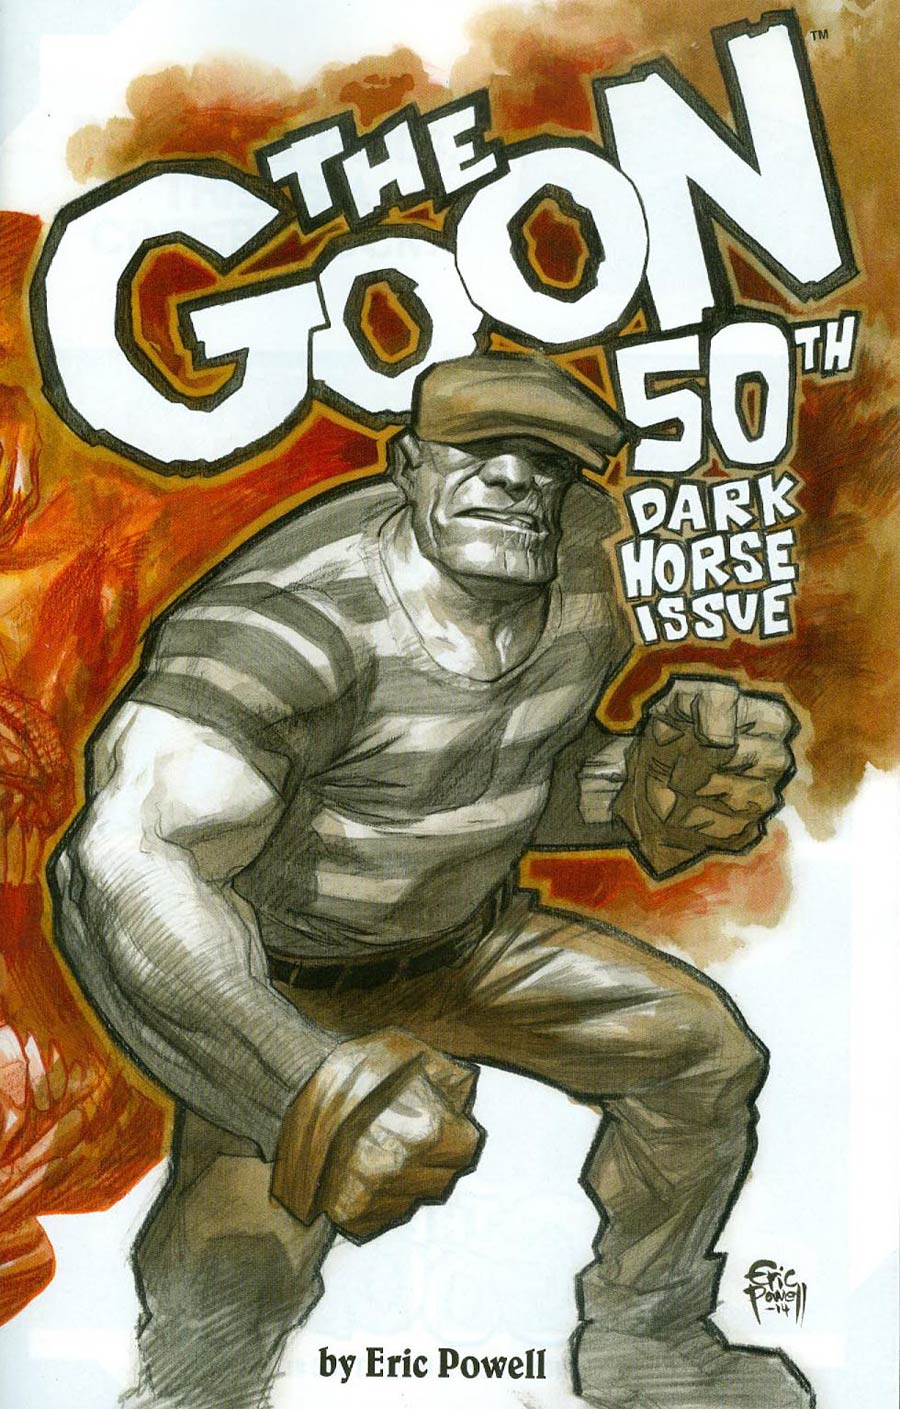 The Goon #50 cover